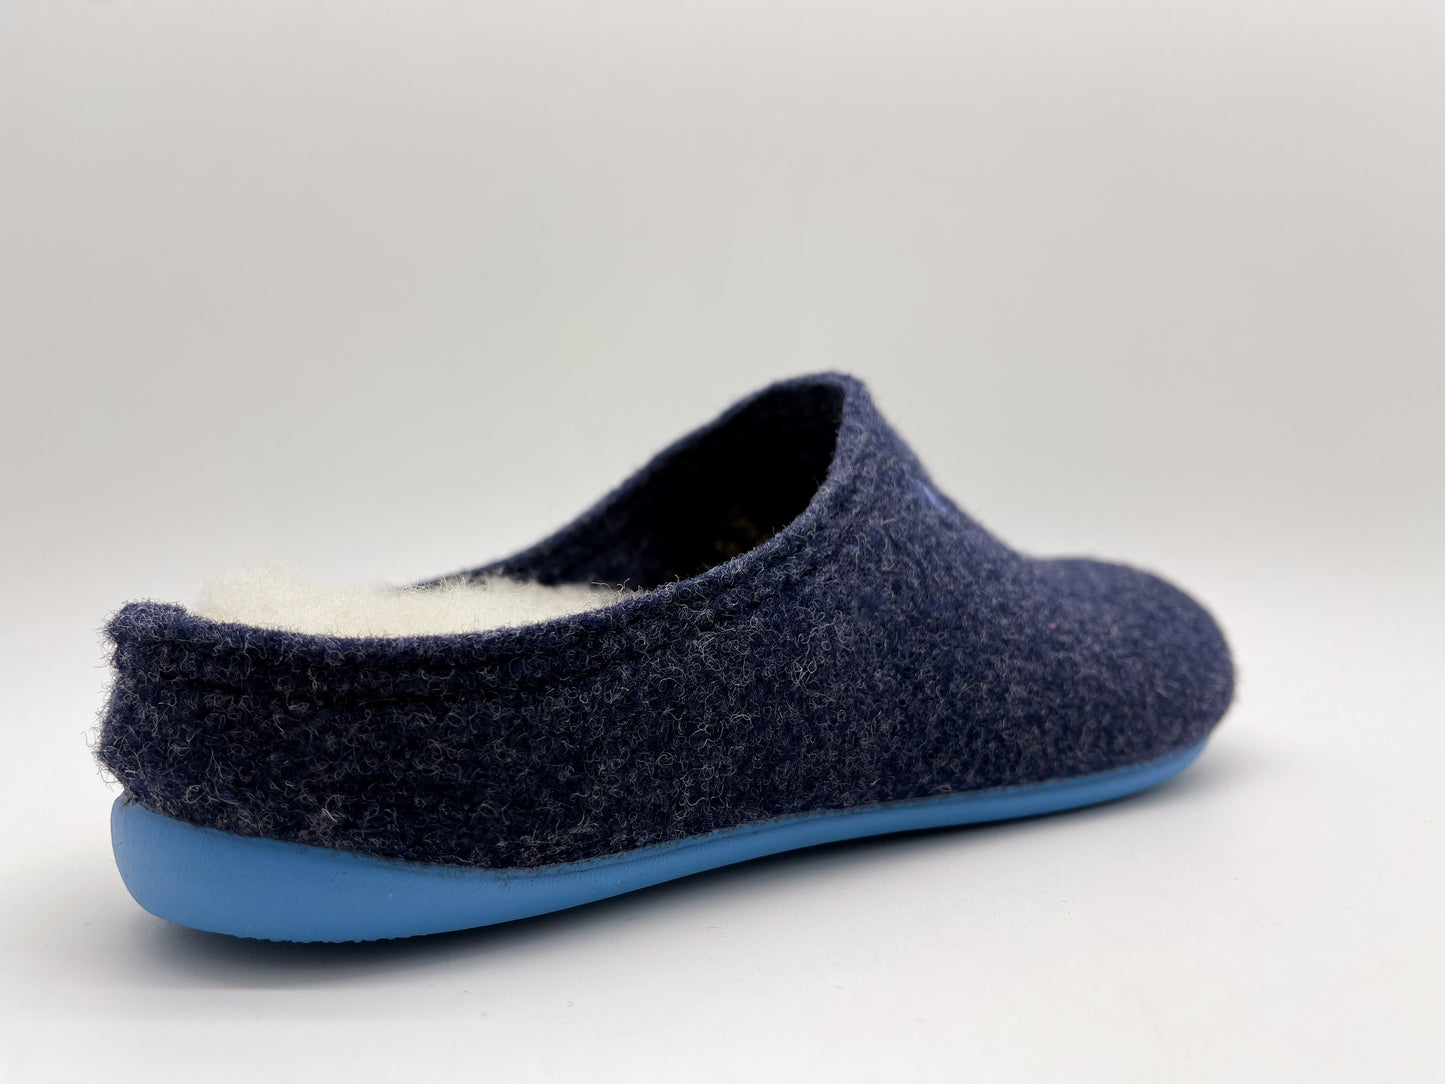 thies 1856 ® Recycled Wool Slippers dark navy blue (W)